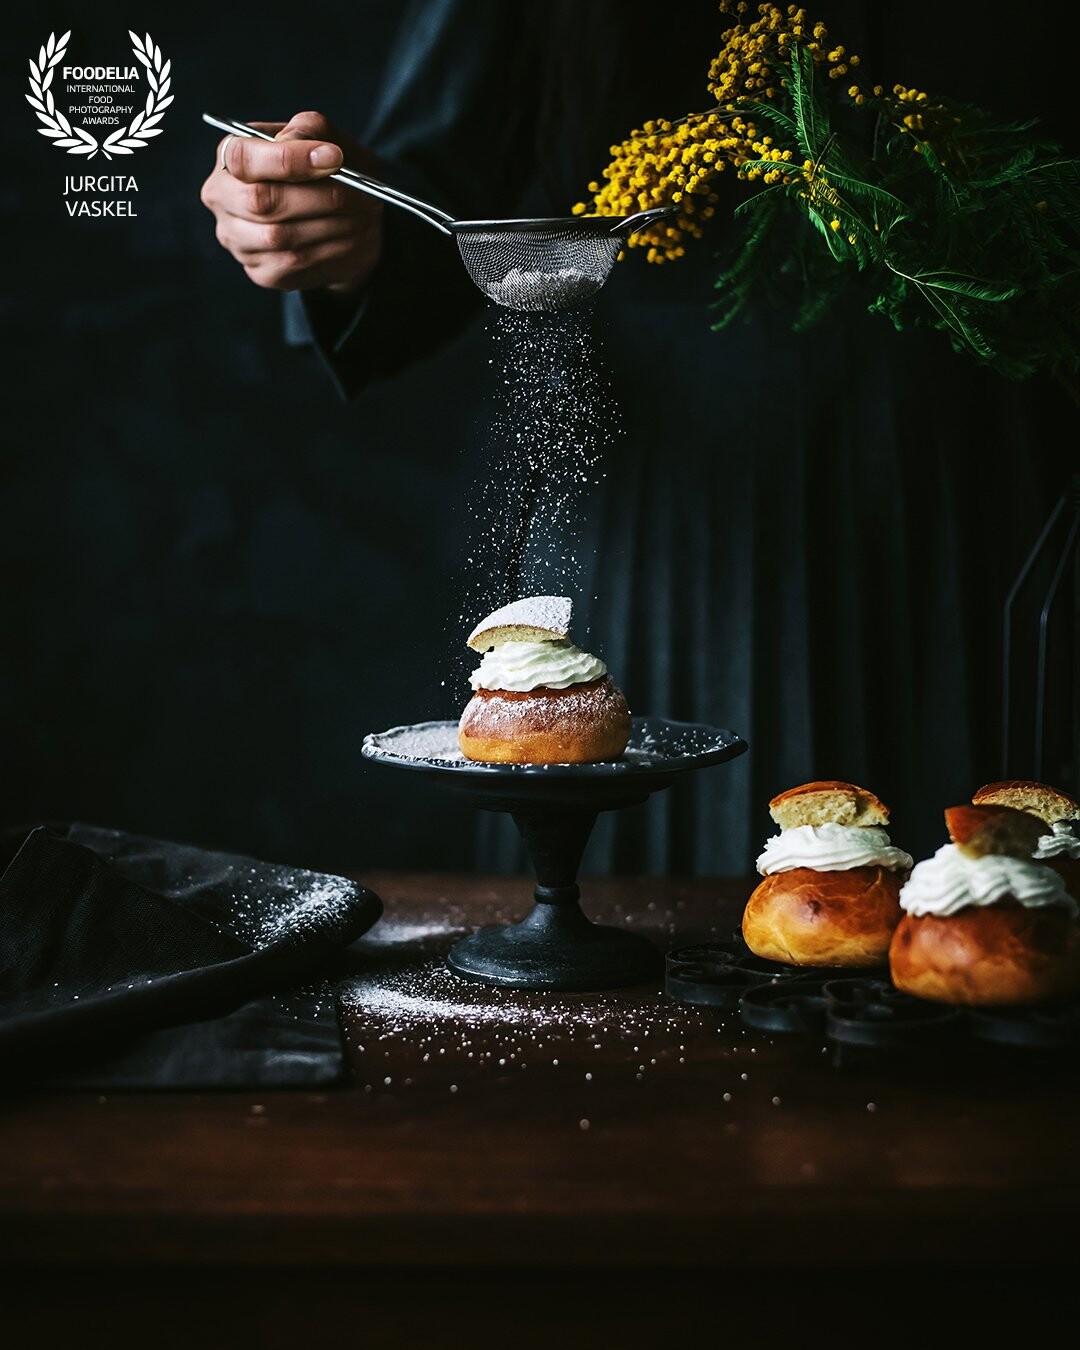 From shadows to the light. Dusting sugar make wonders and create an inspiring scene. These Swedish semlor look even more inviting when dusted with some sweet sprinkles.